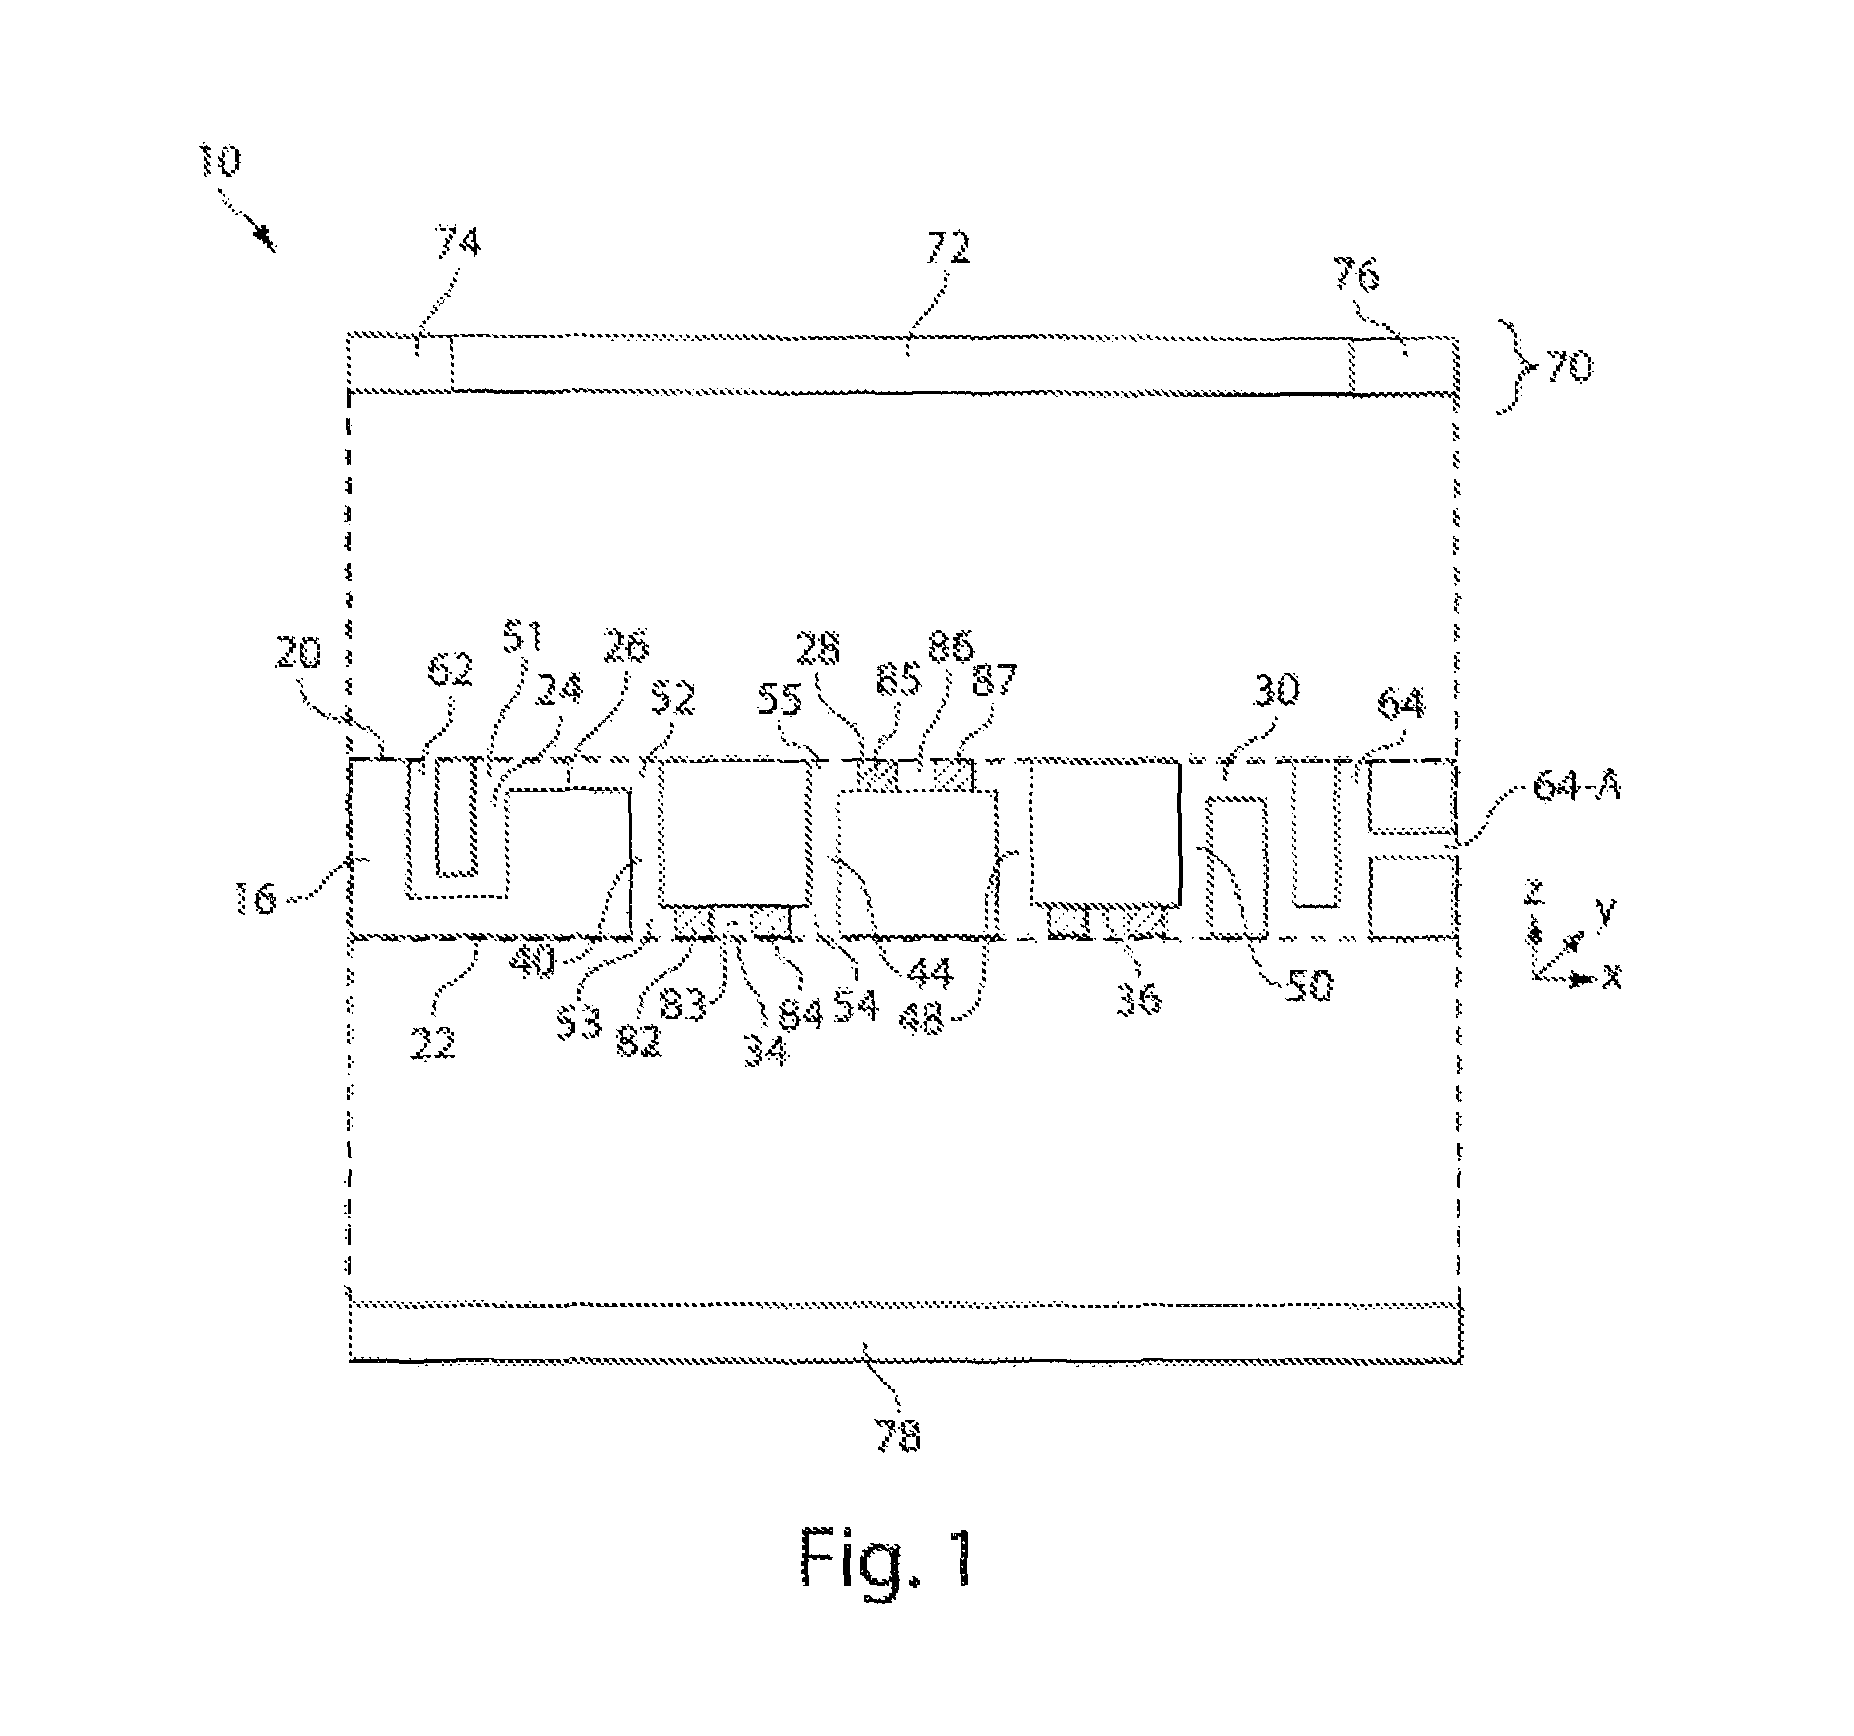 Reagent storage in microfluidic systems and related articles and methods